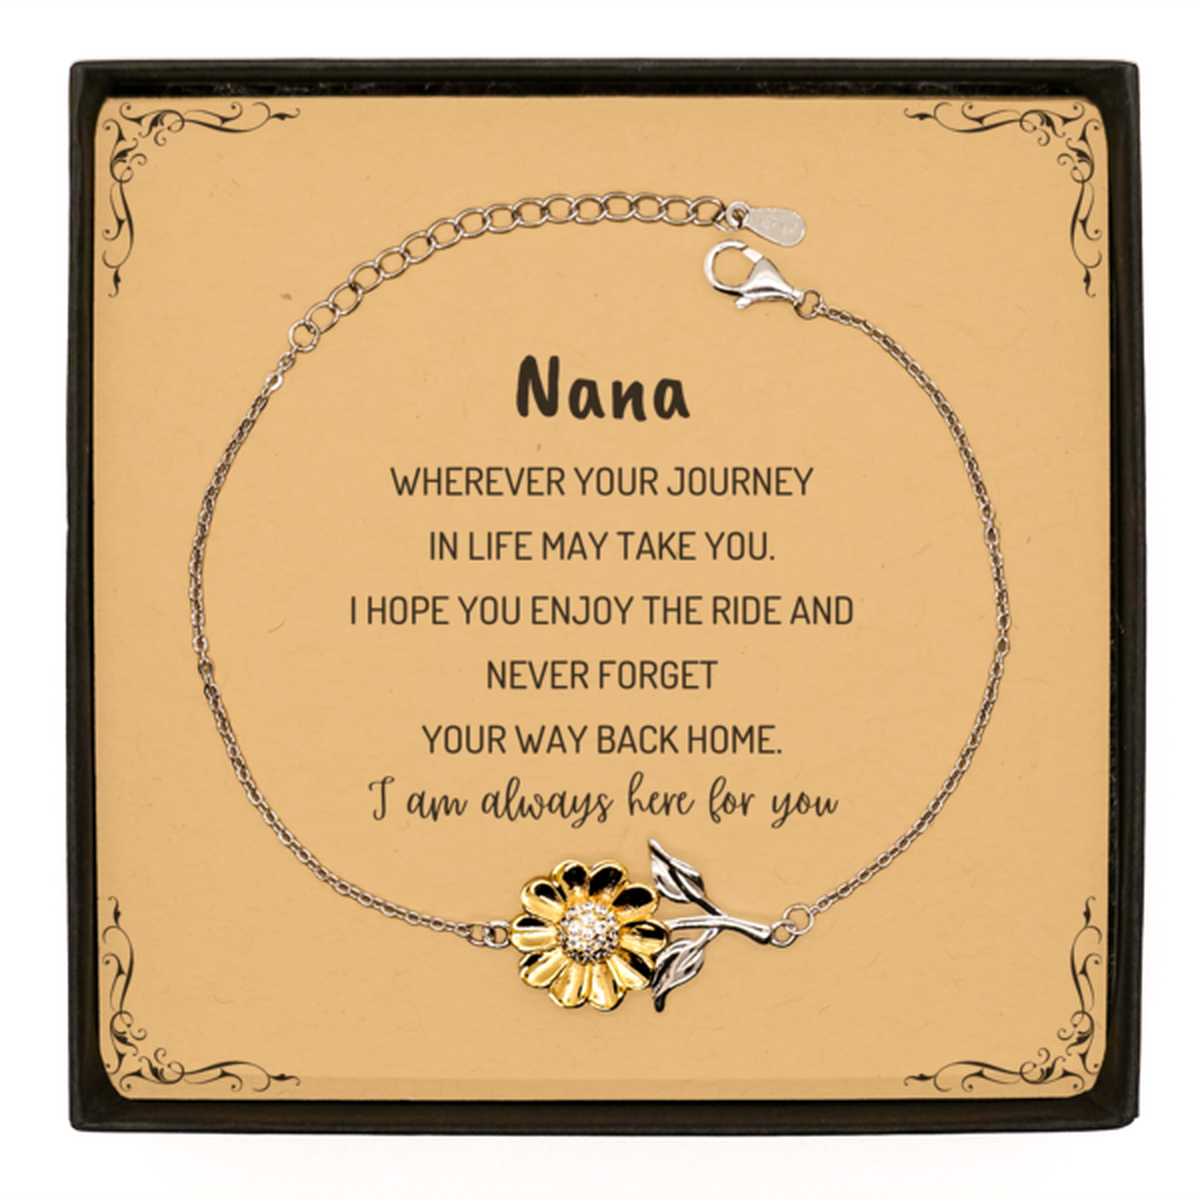 Nana wherever your journey in life may take you, I am always here for you Nana Sunflower Bracelet, Awesome Christmas Gifts For Nana Message Card, Nana Birthday Gifts for Men Women Family Loved One